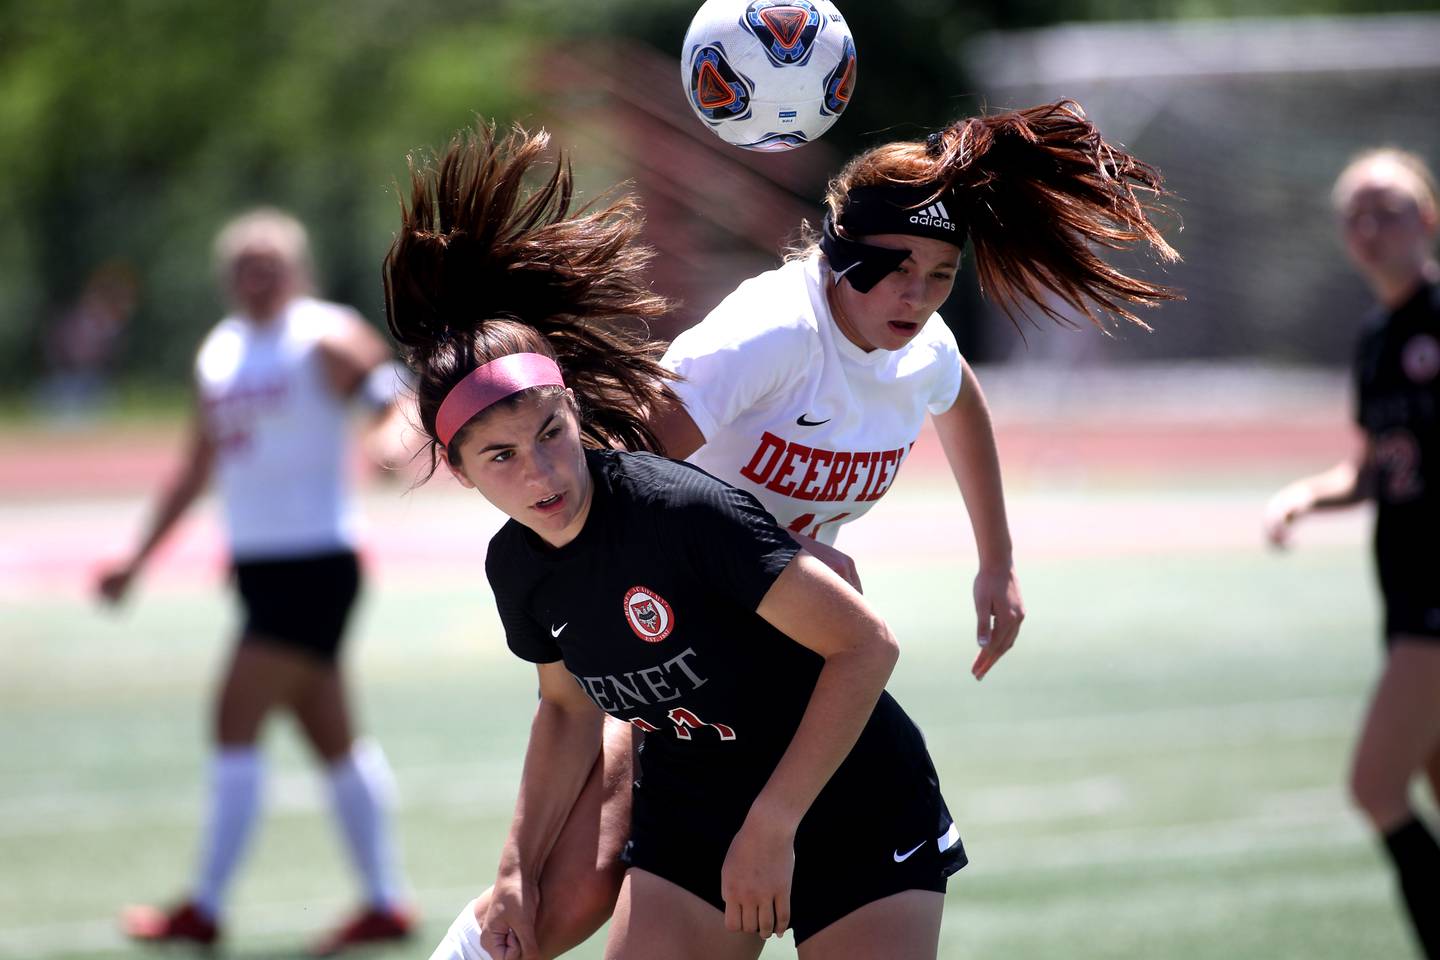 Benet’s Gabi DiMatteo (left) and Deerfield’s Jessie Fisher head the ball during an IHSA Class 2A state semifinal game at North Central College in Naperville on Friday, June 3, 2022.